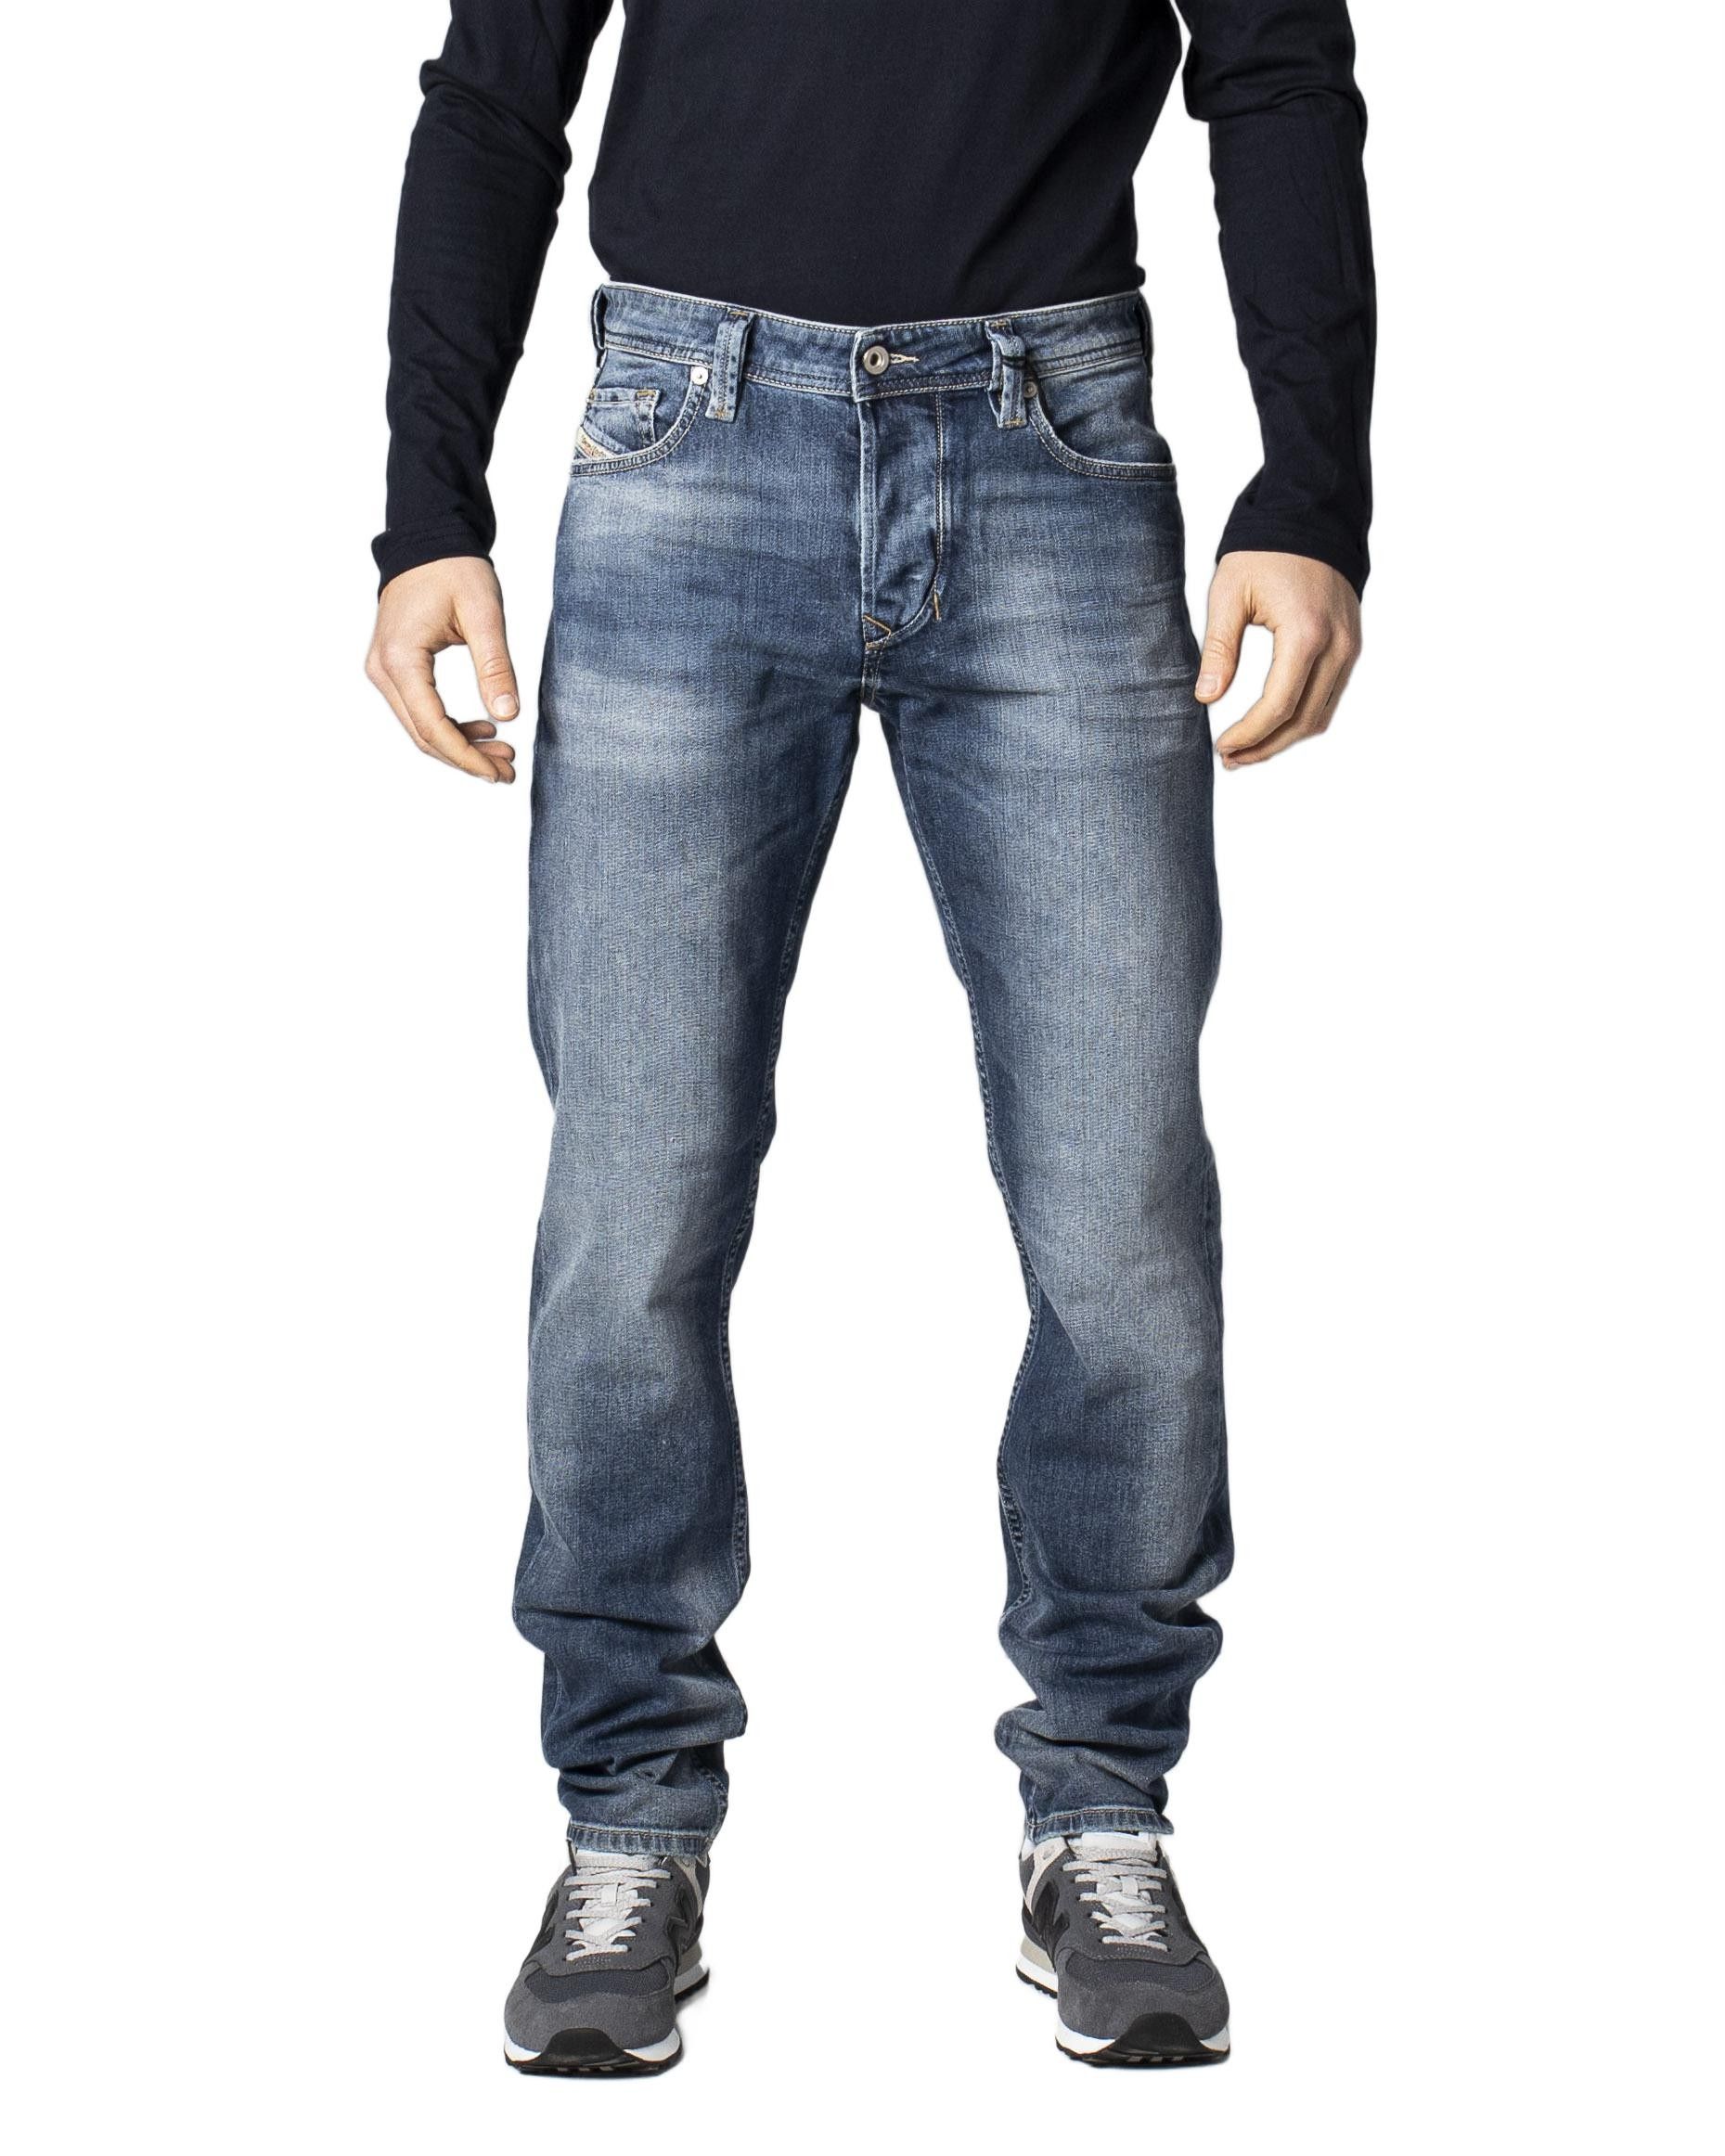 Brand: Diesel Gender: Men Type: Jeans Season: Spring/Summer  PRODUCT DETAIL • Color: blue • Pattern: plain • Fastening: zip and button • Pockets: front and back pockets  • Details: -worn out effect   COMPOSITION AND MATERIAL • Composition: -98% cotton -2% lycra  •  Washing: machine wash at 30°